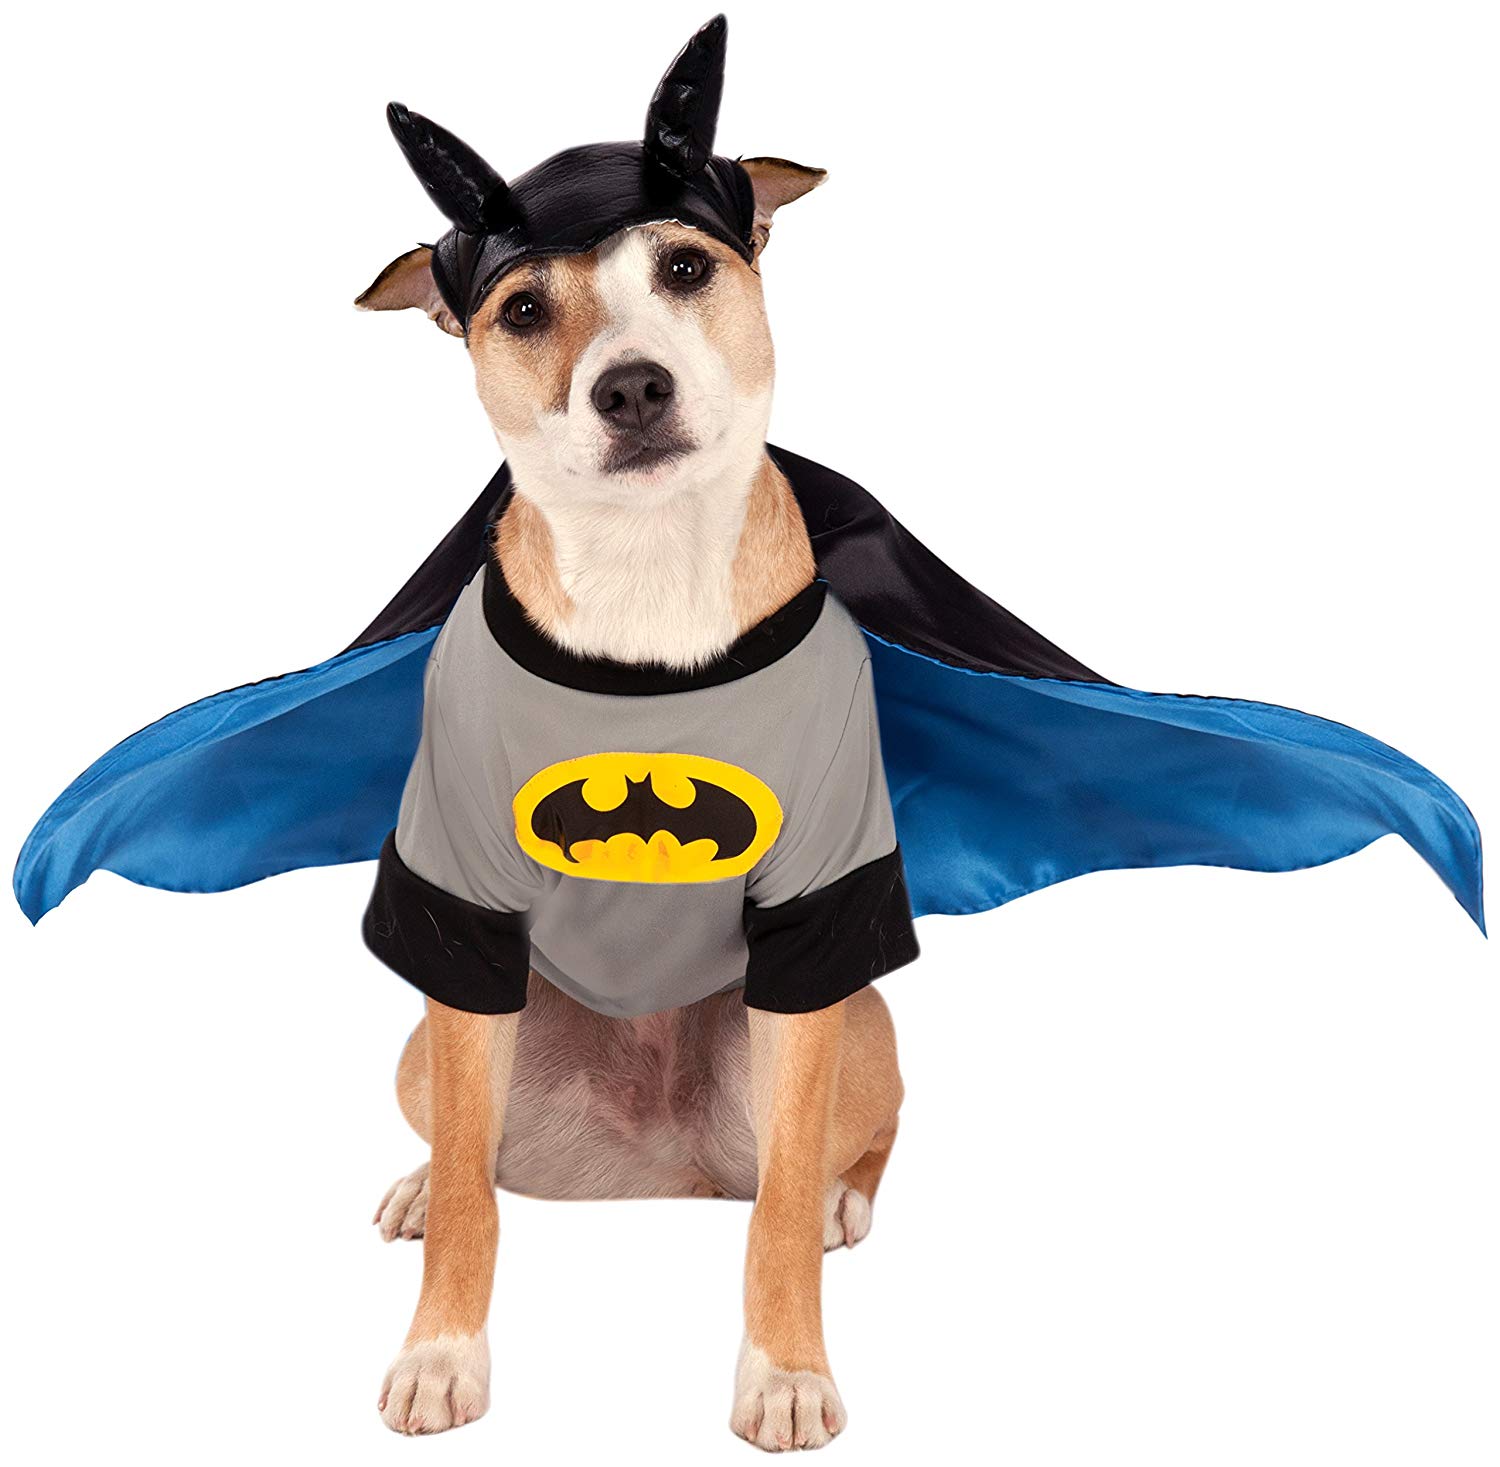 Small dog breed sitting in an isolated white background wearing a Batman Costume